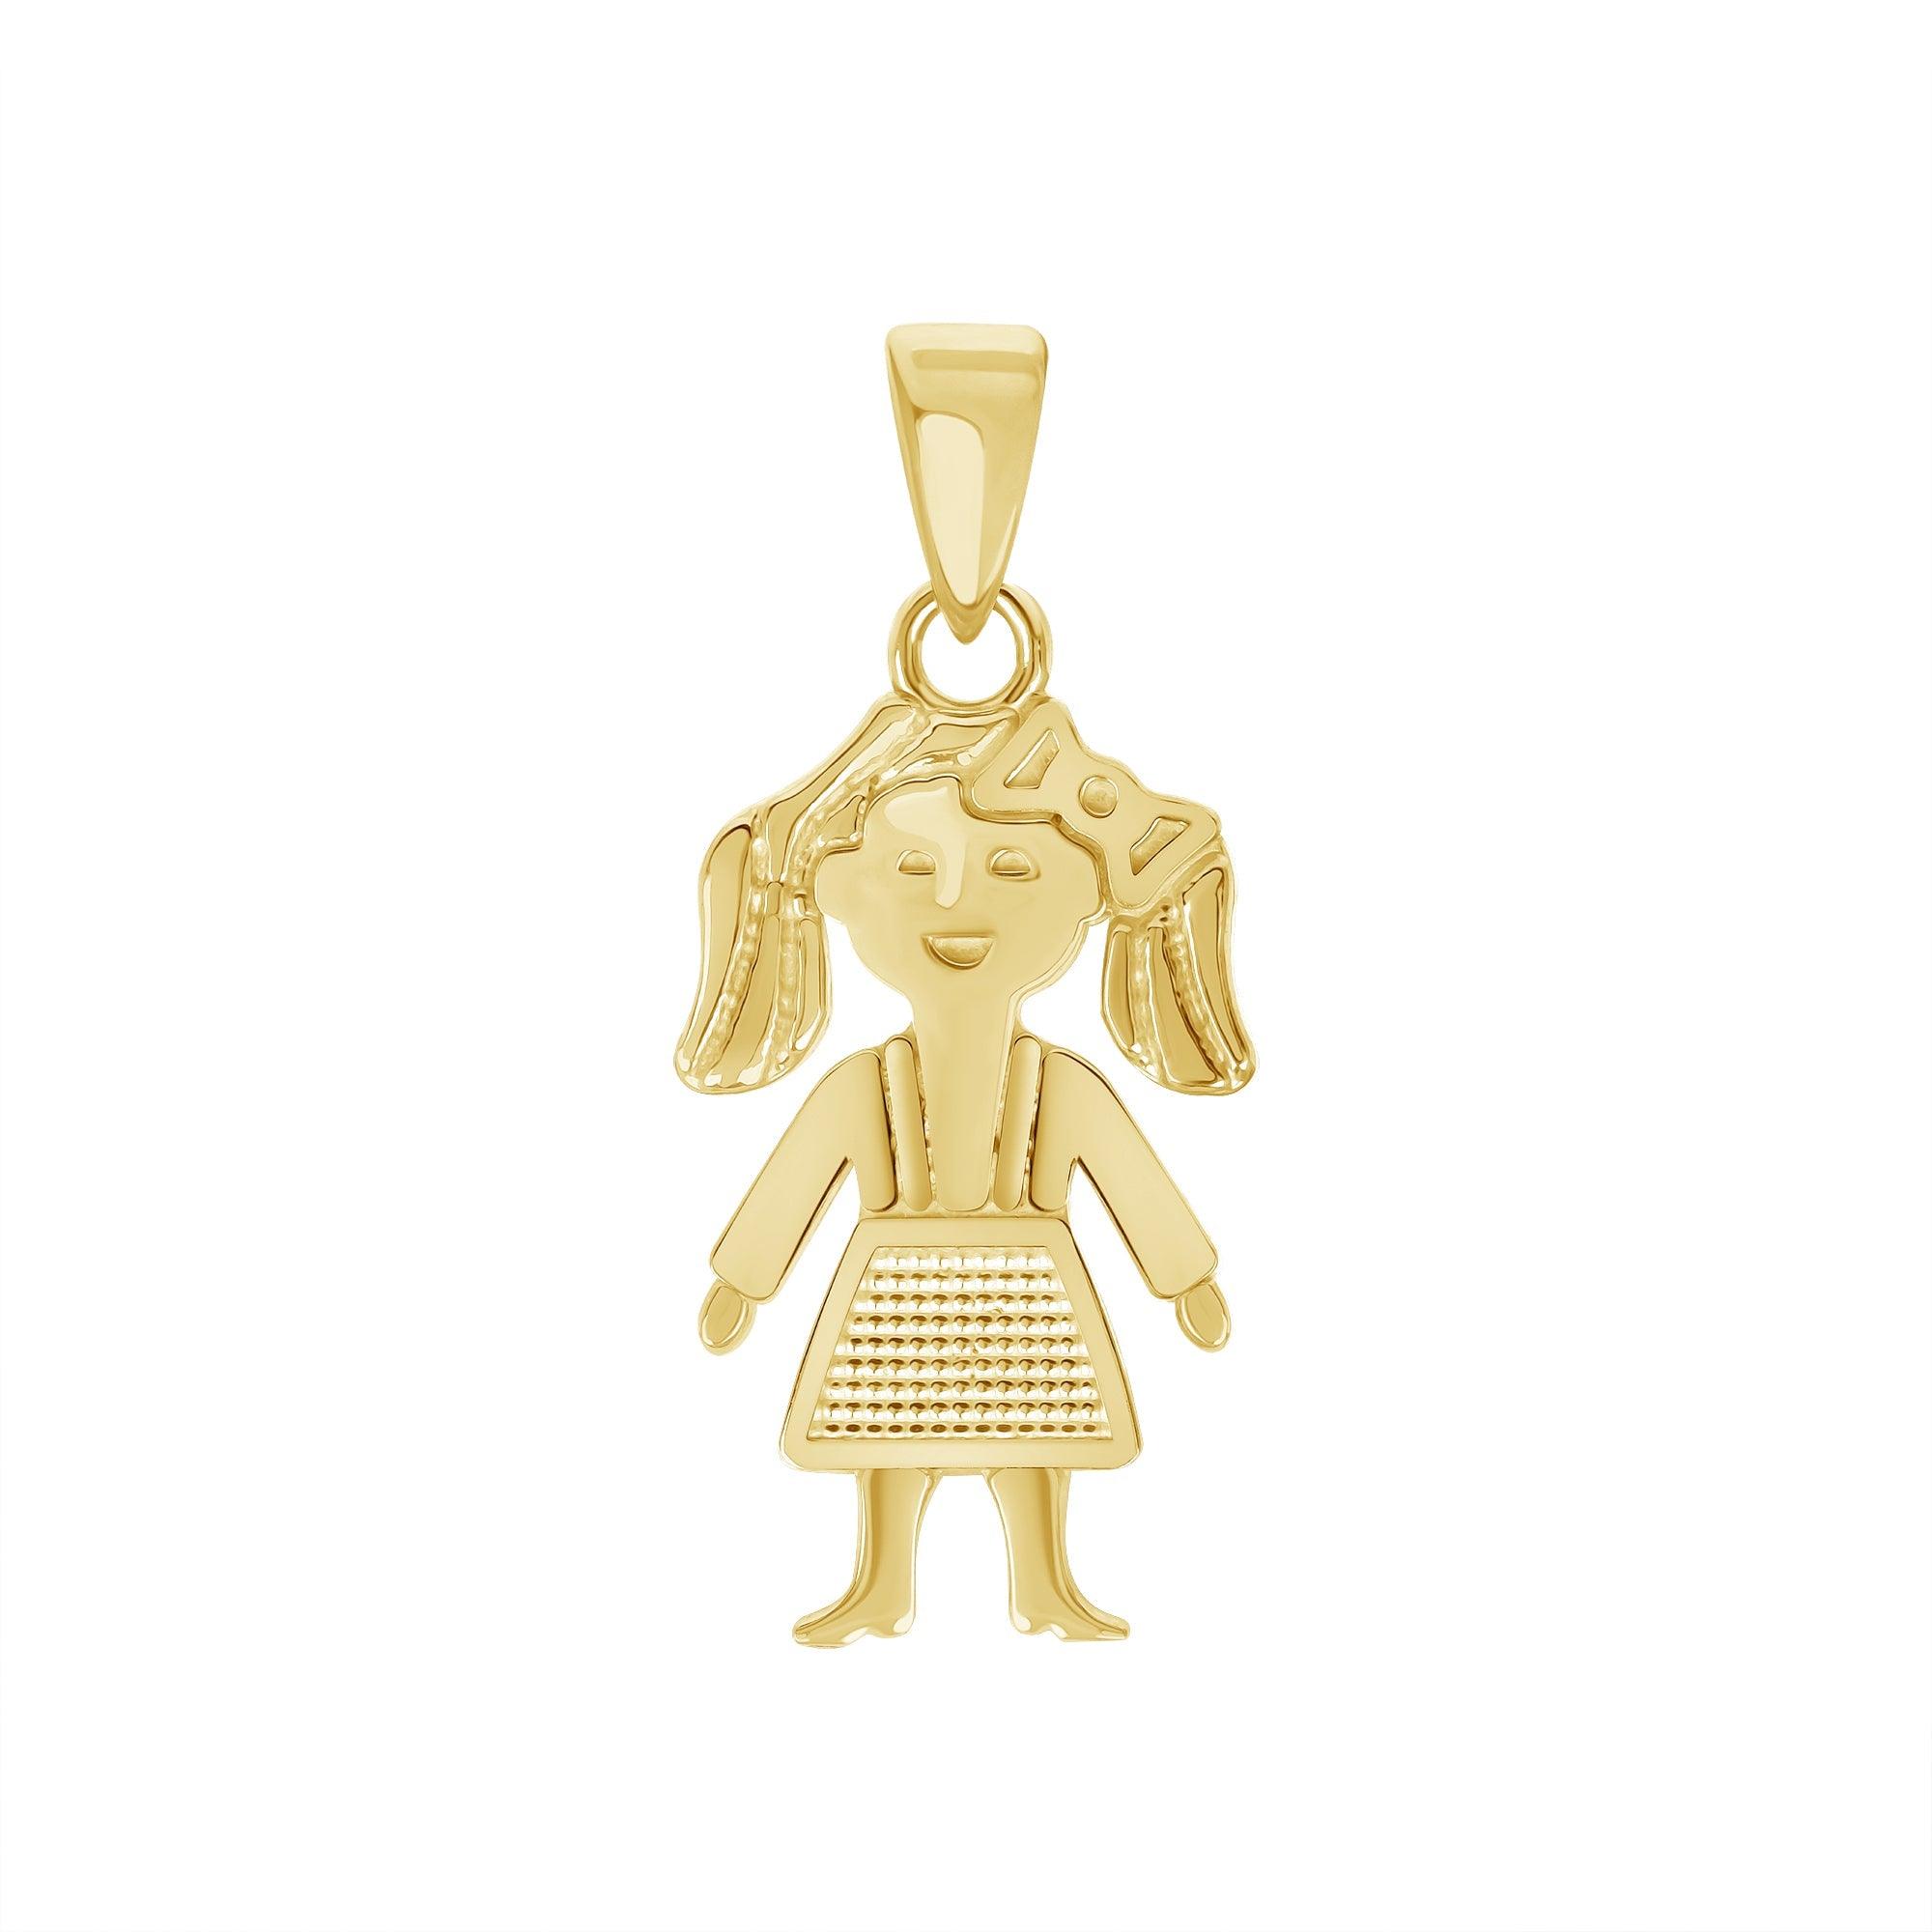 Charming Solid Gold Little Girl Pendant Necklace for Women from Rafi's Jewelry